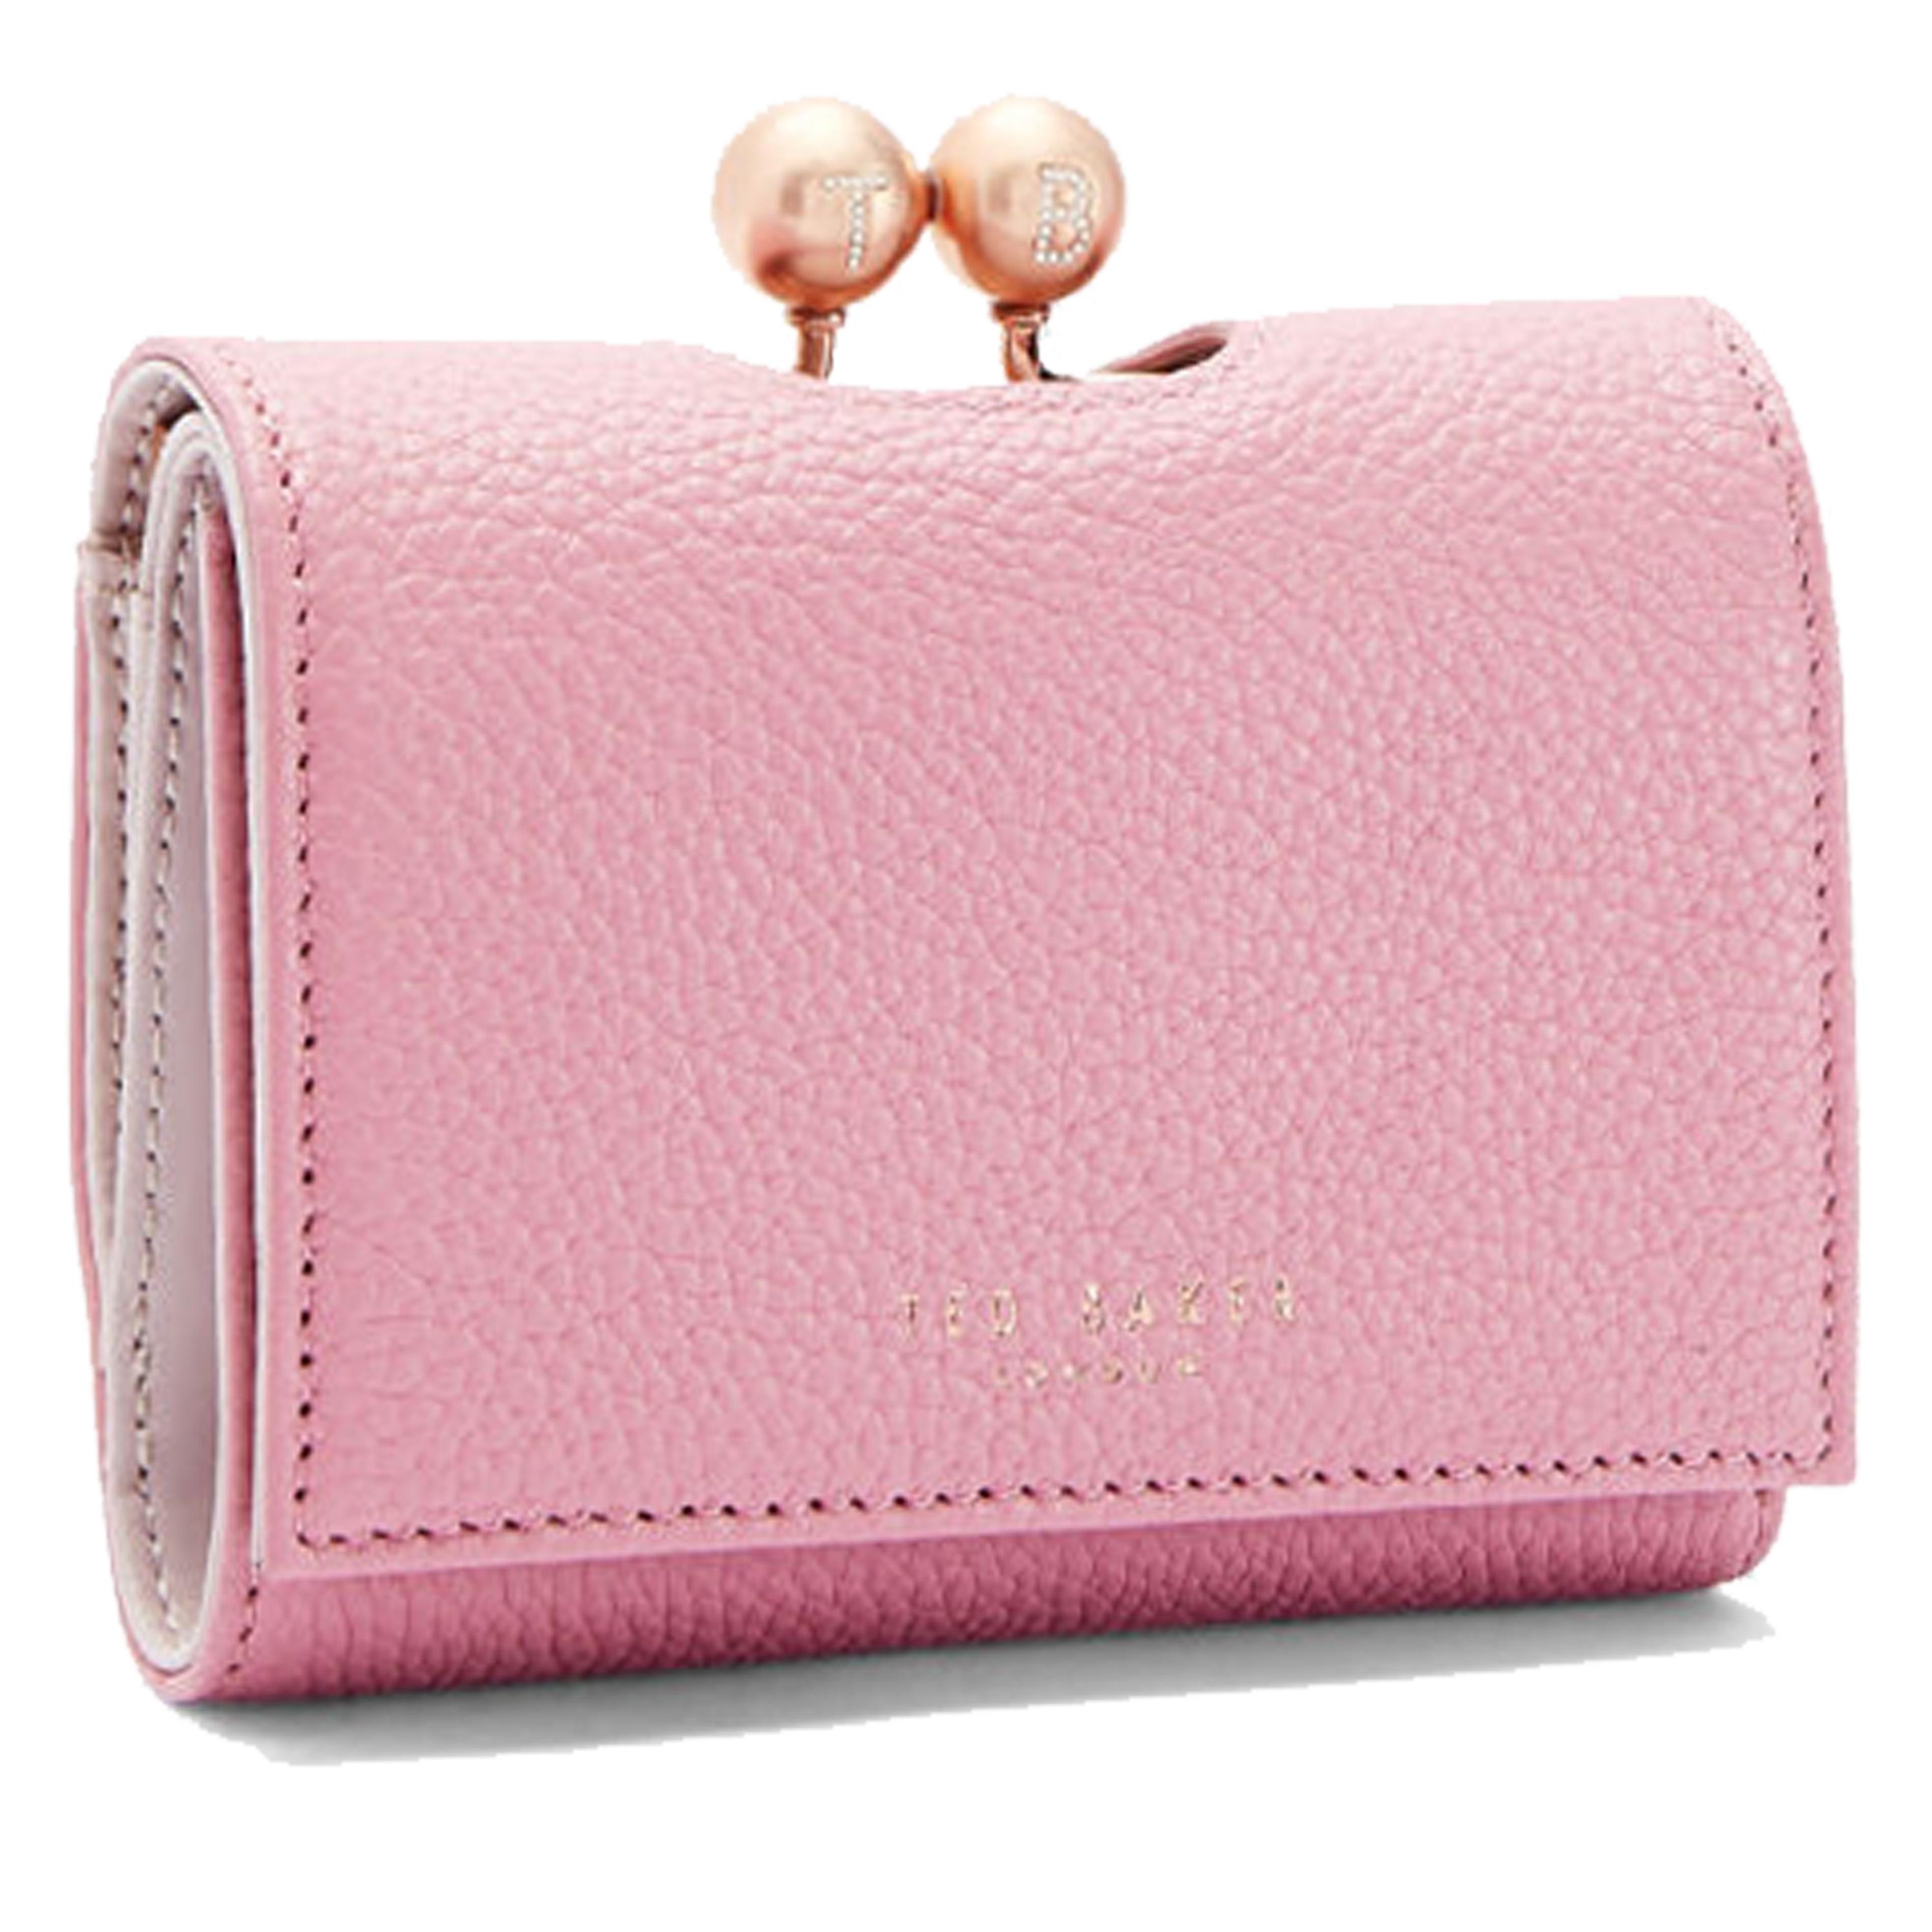 Ted Baker Purse Sale Pink Lily | semashow.com